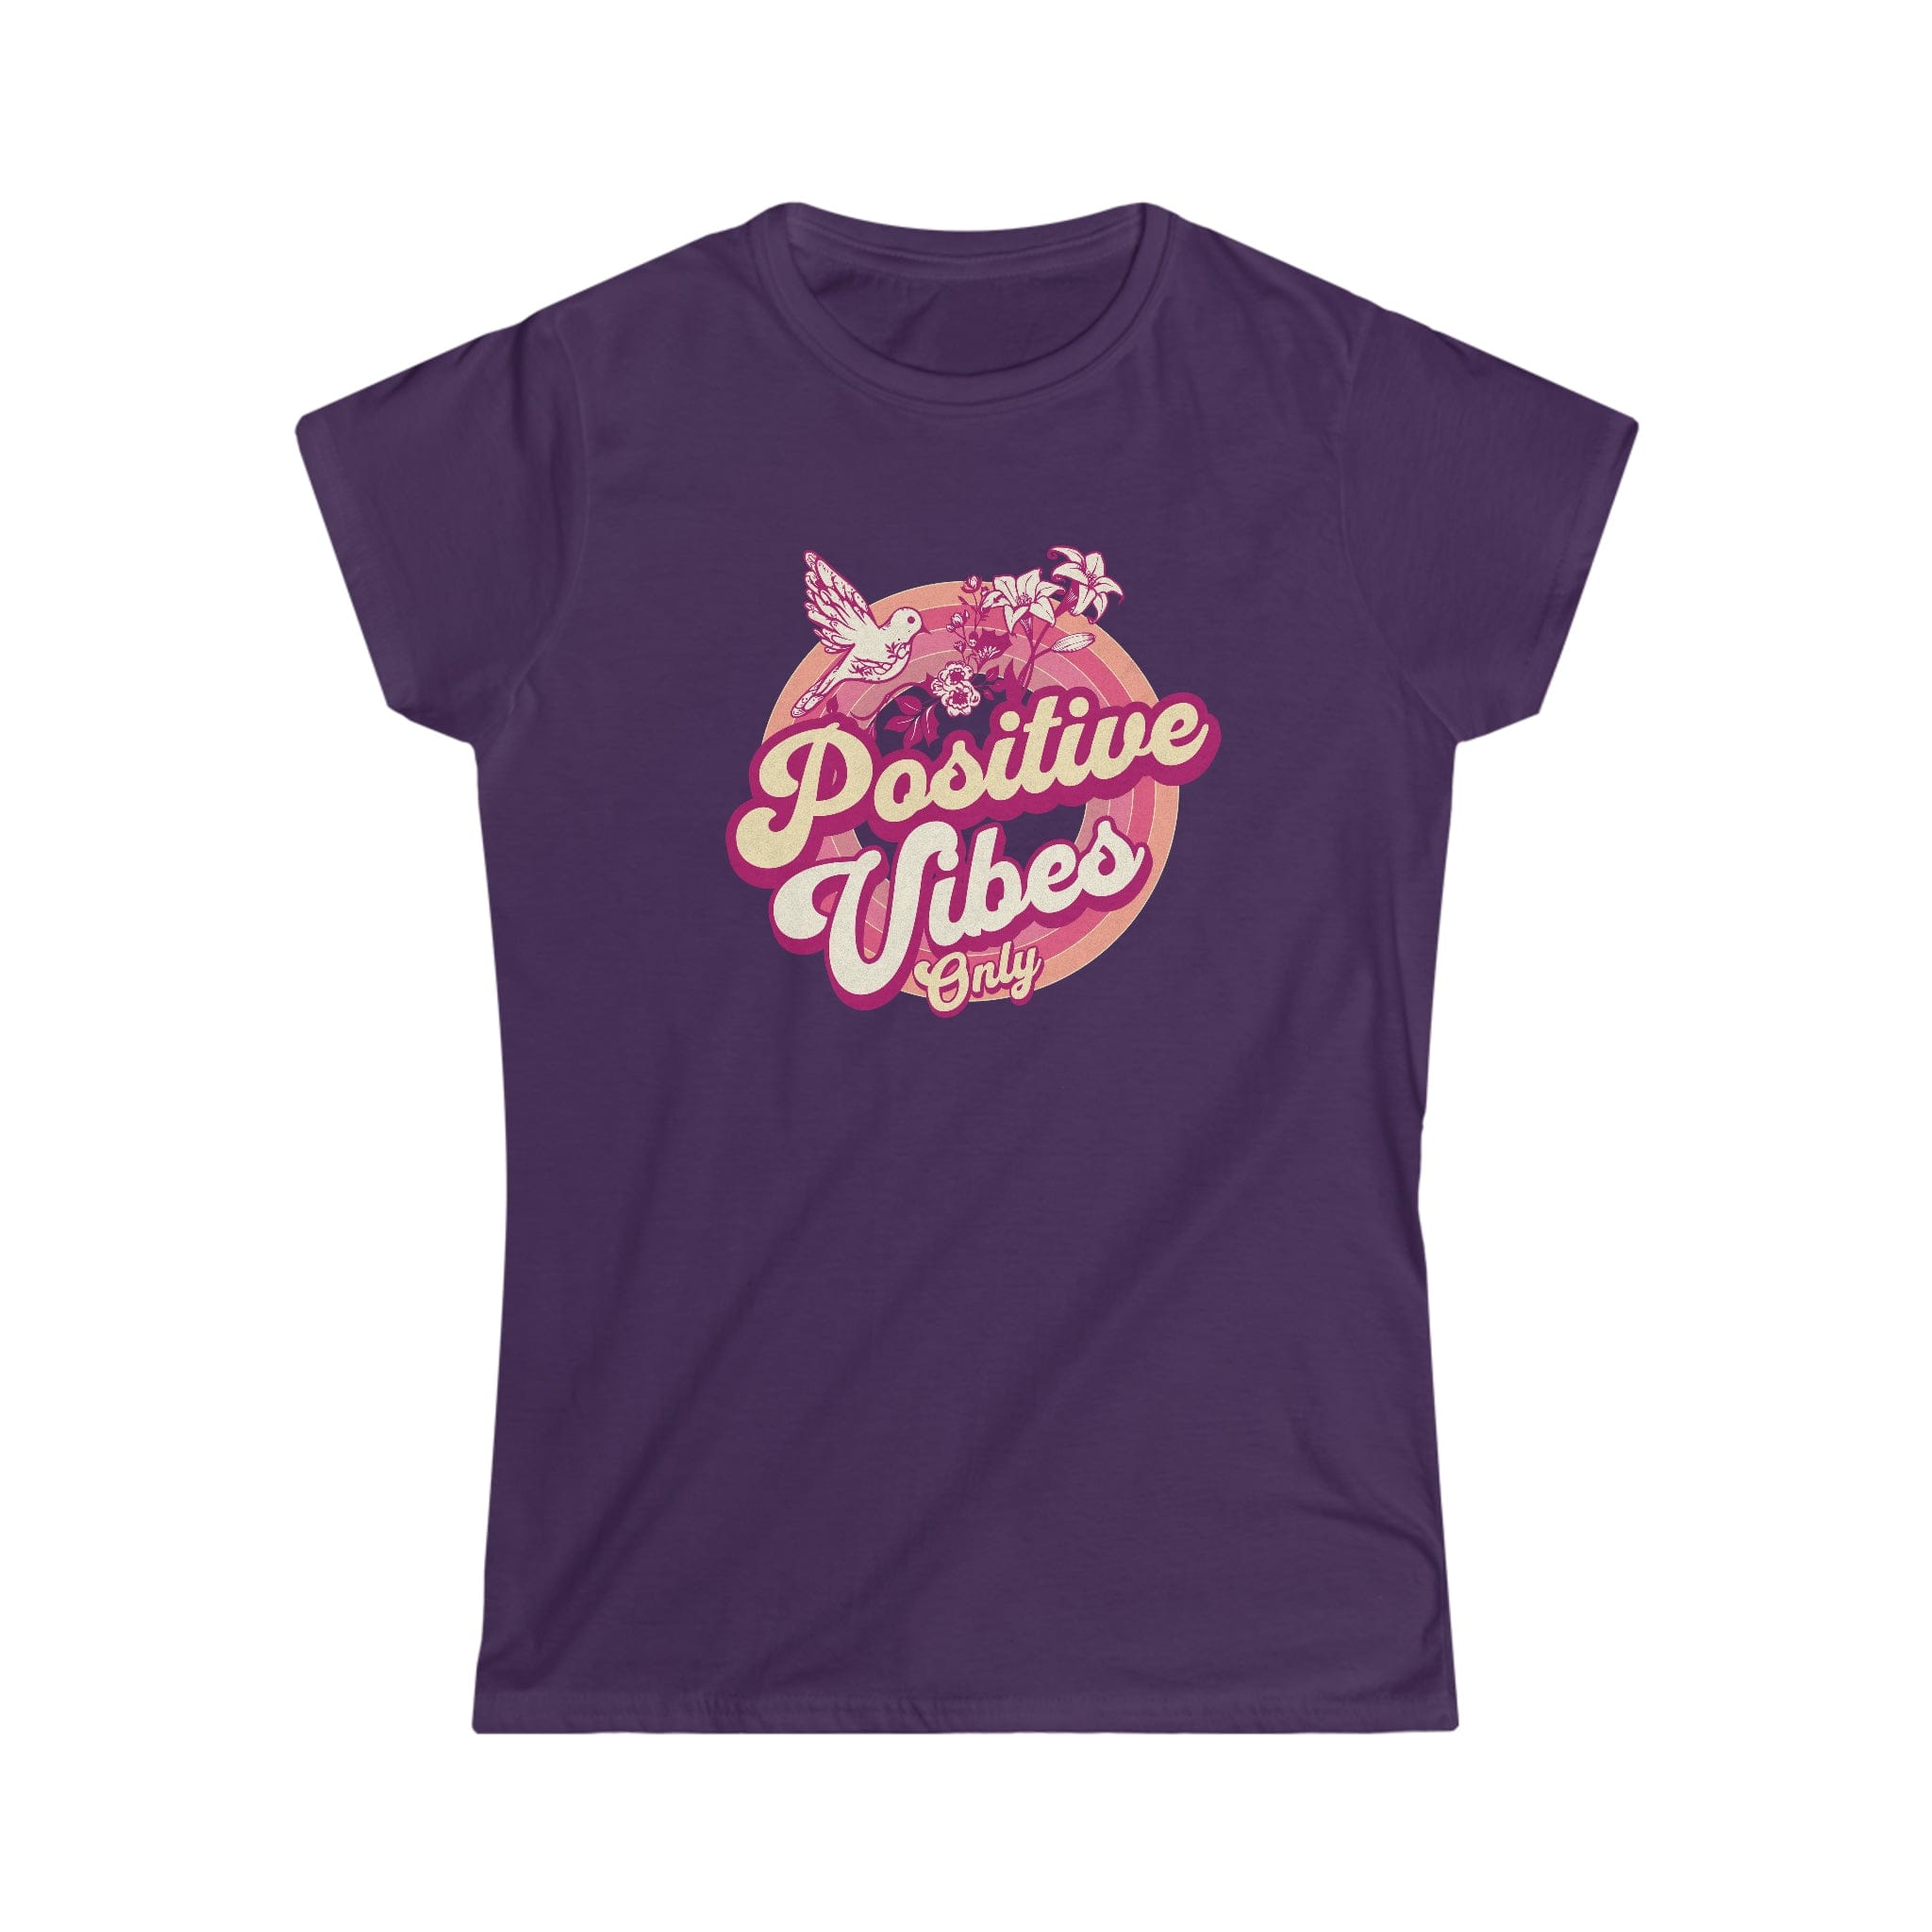 Positive Vibes Only - Women's Softstyle Tee